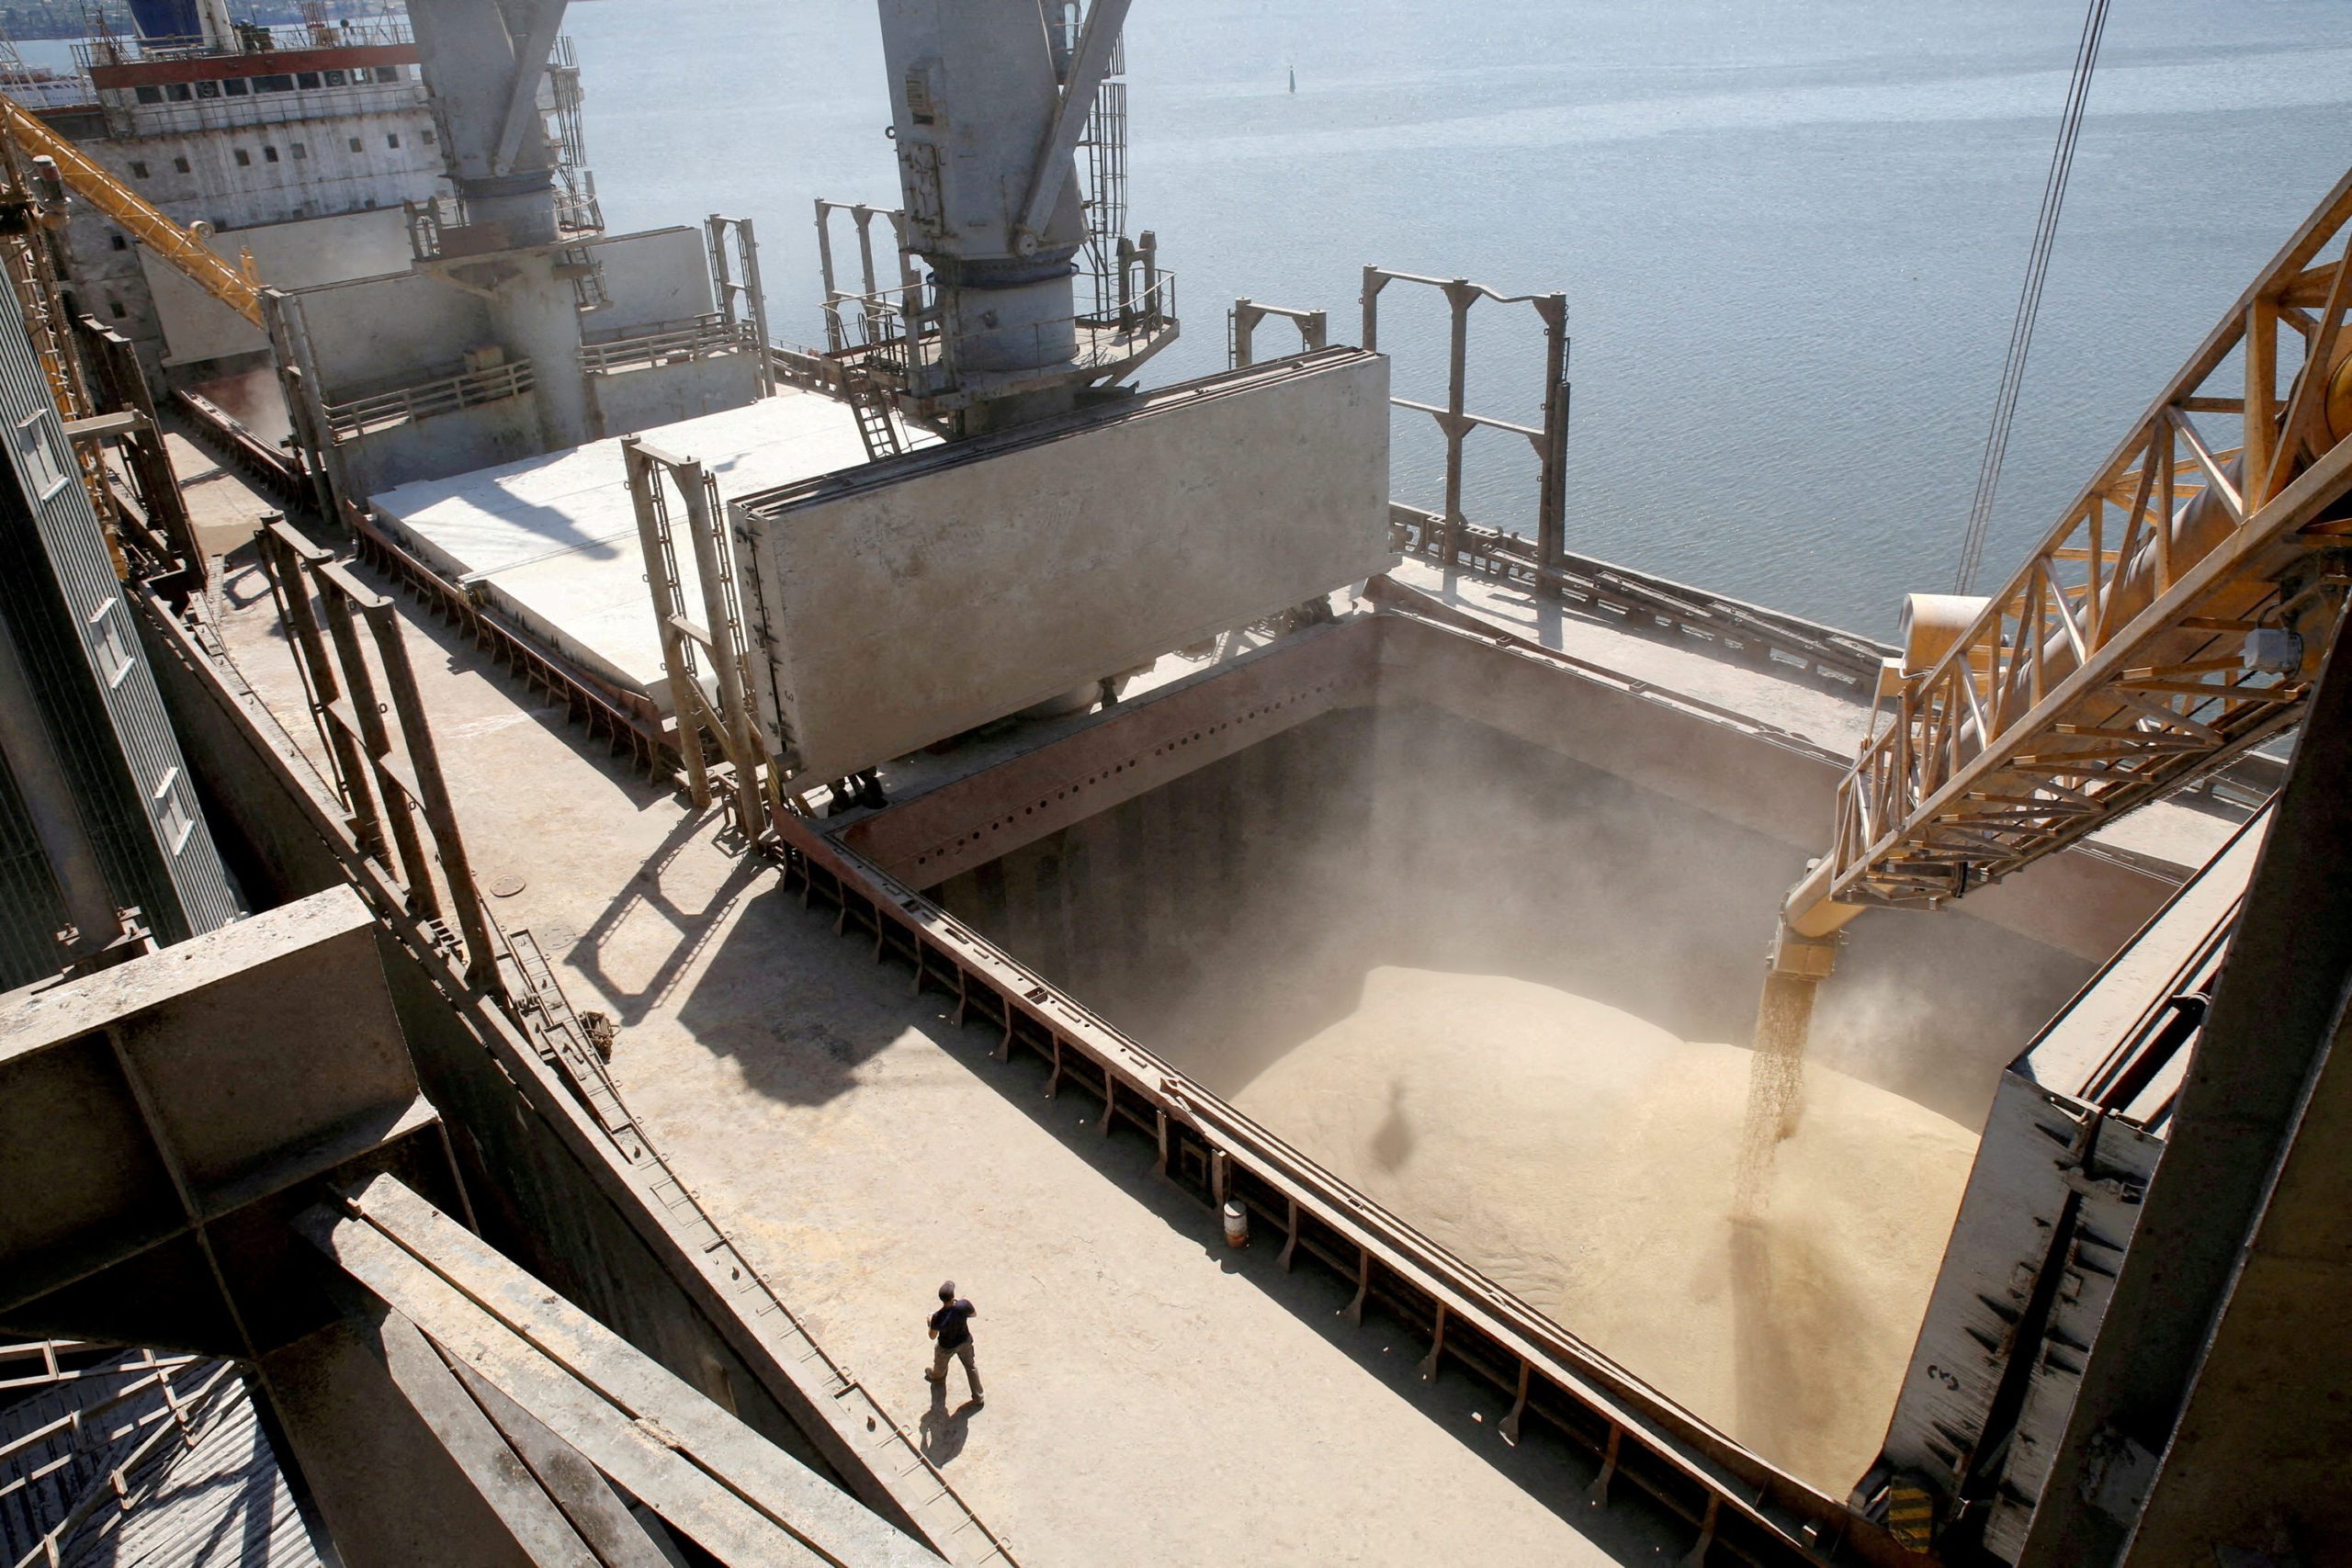 A dockyard worker watches as barley grain is poured into a ship in Nikolaev. REUTERS/Vincent Mundy